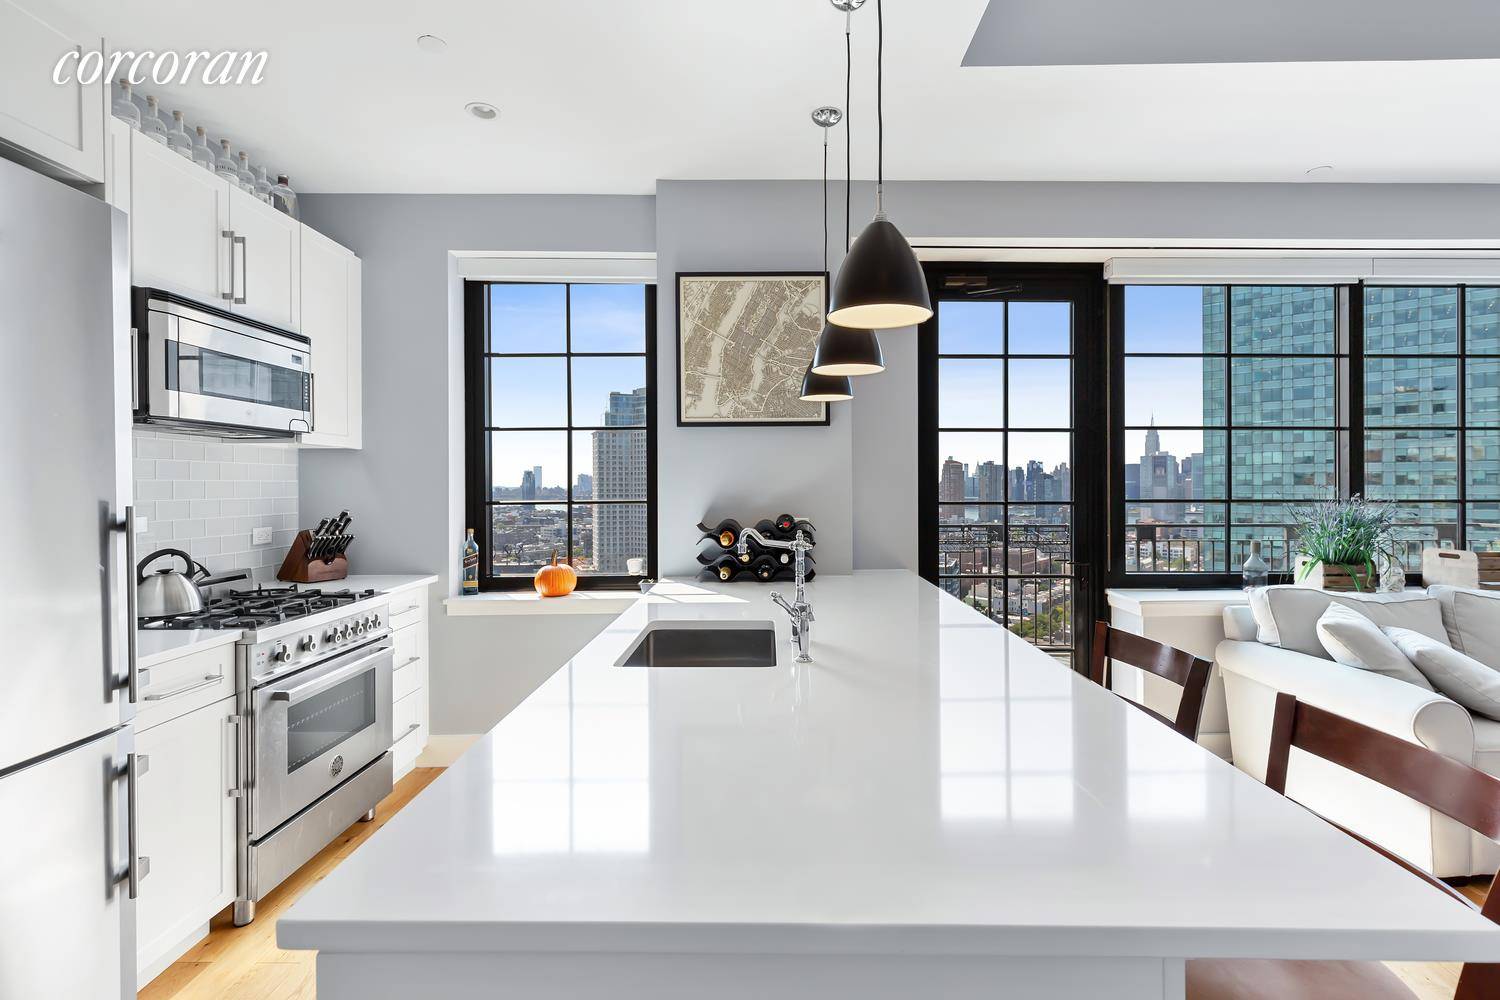 The view from this penthouse is like nothing you have seen before.